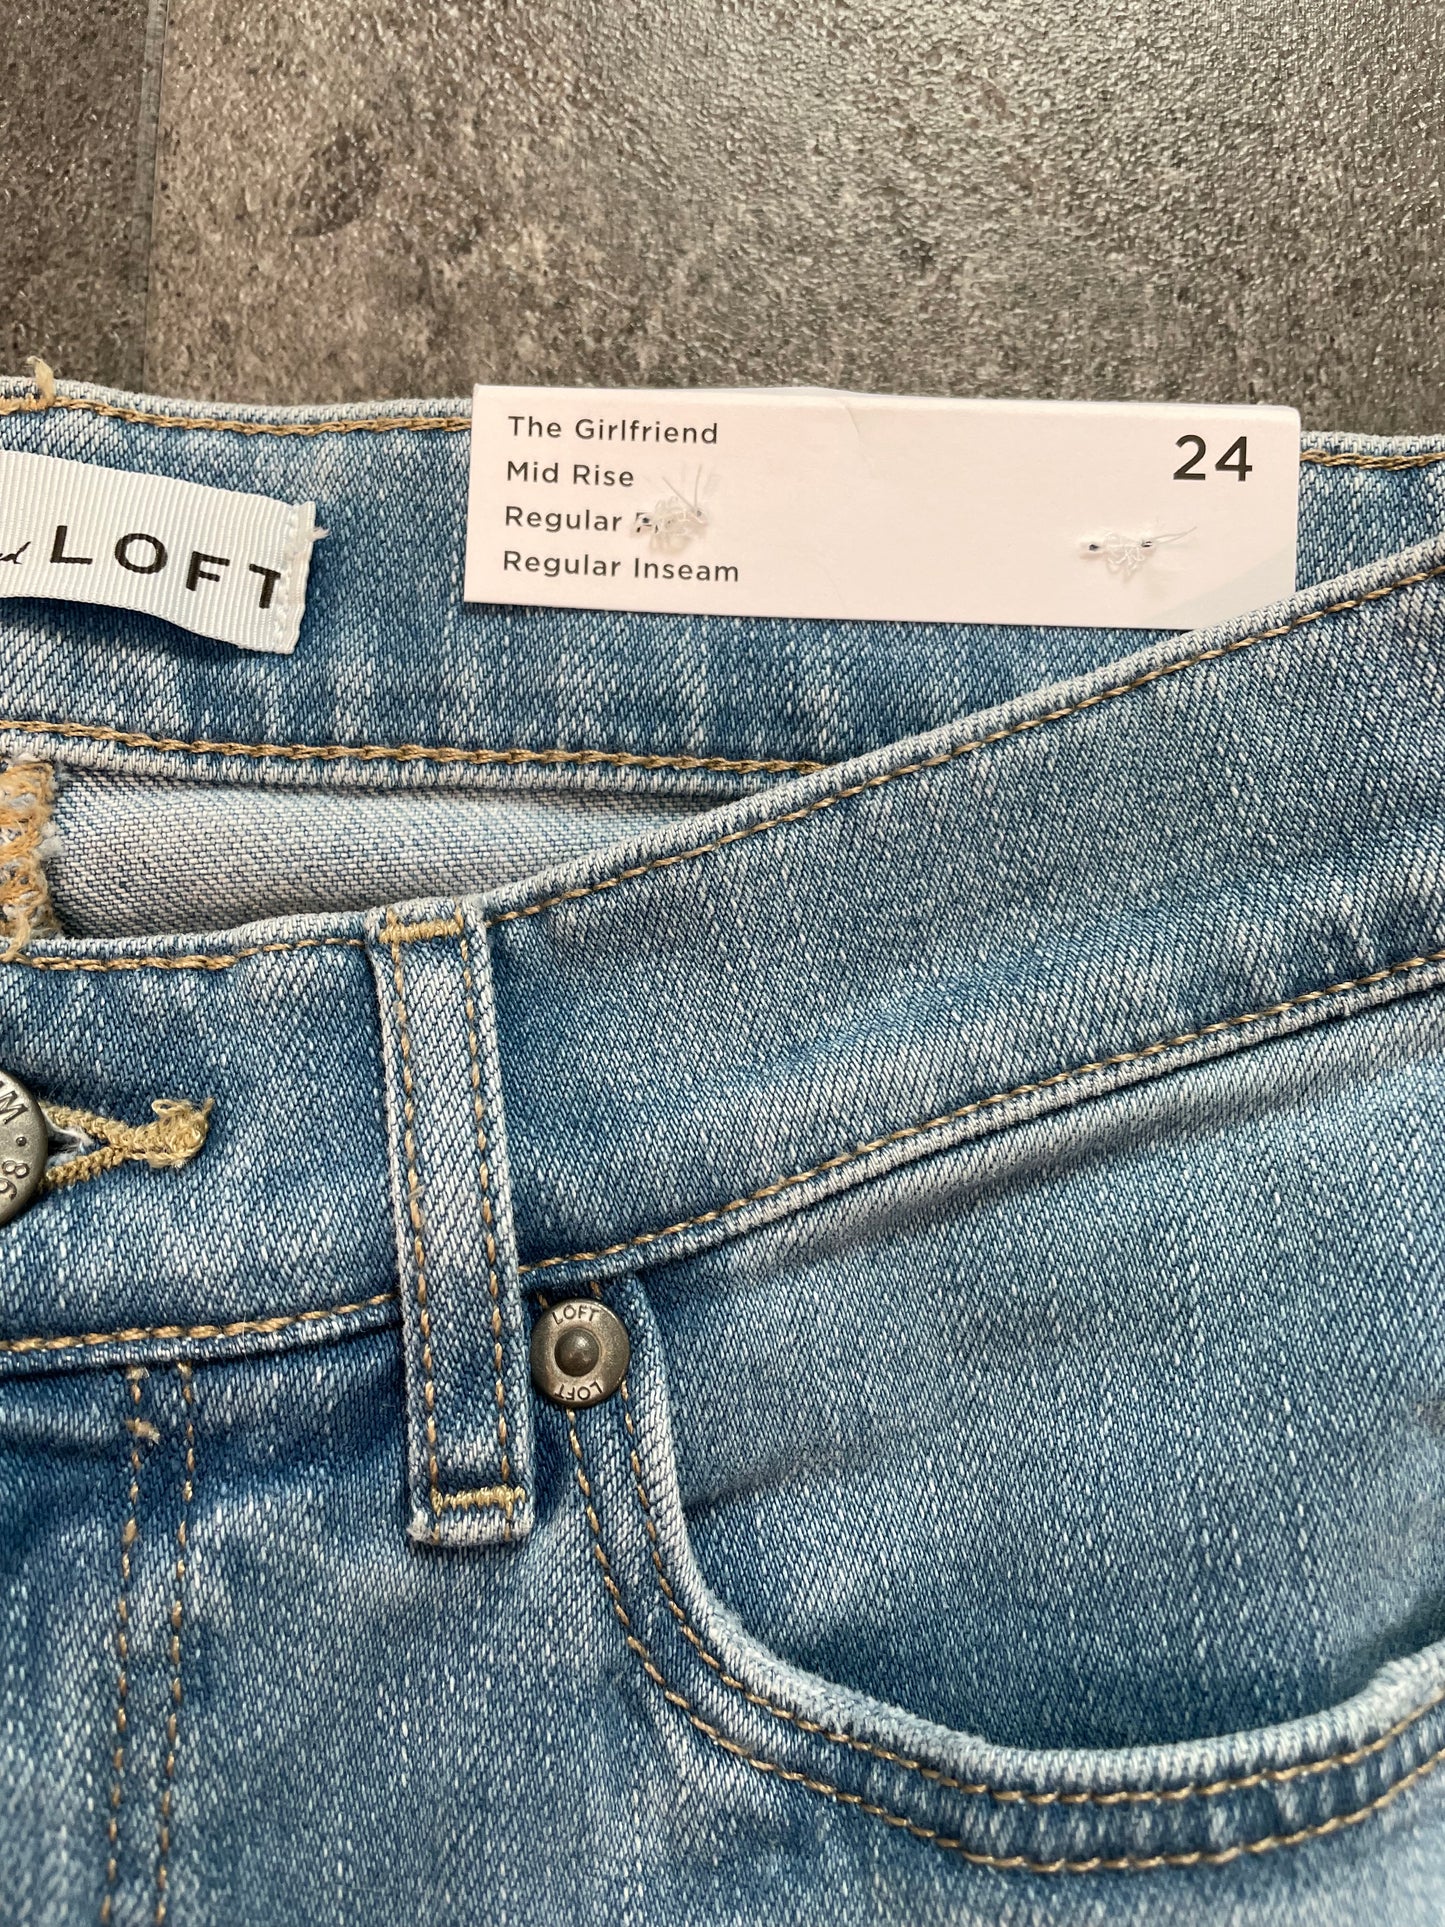 The Loft The Girlfriend Mid-Rise Jeans (24/00)